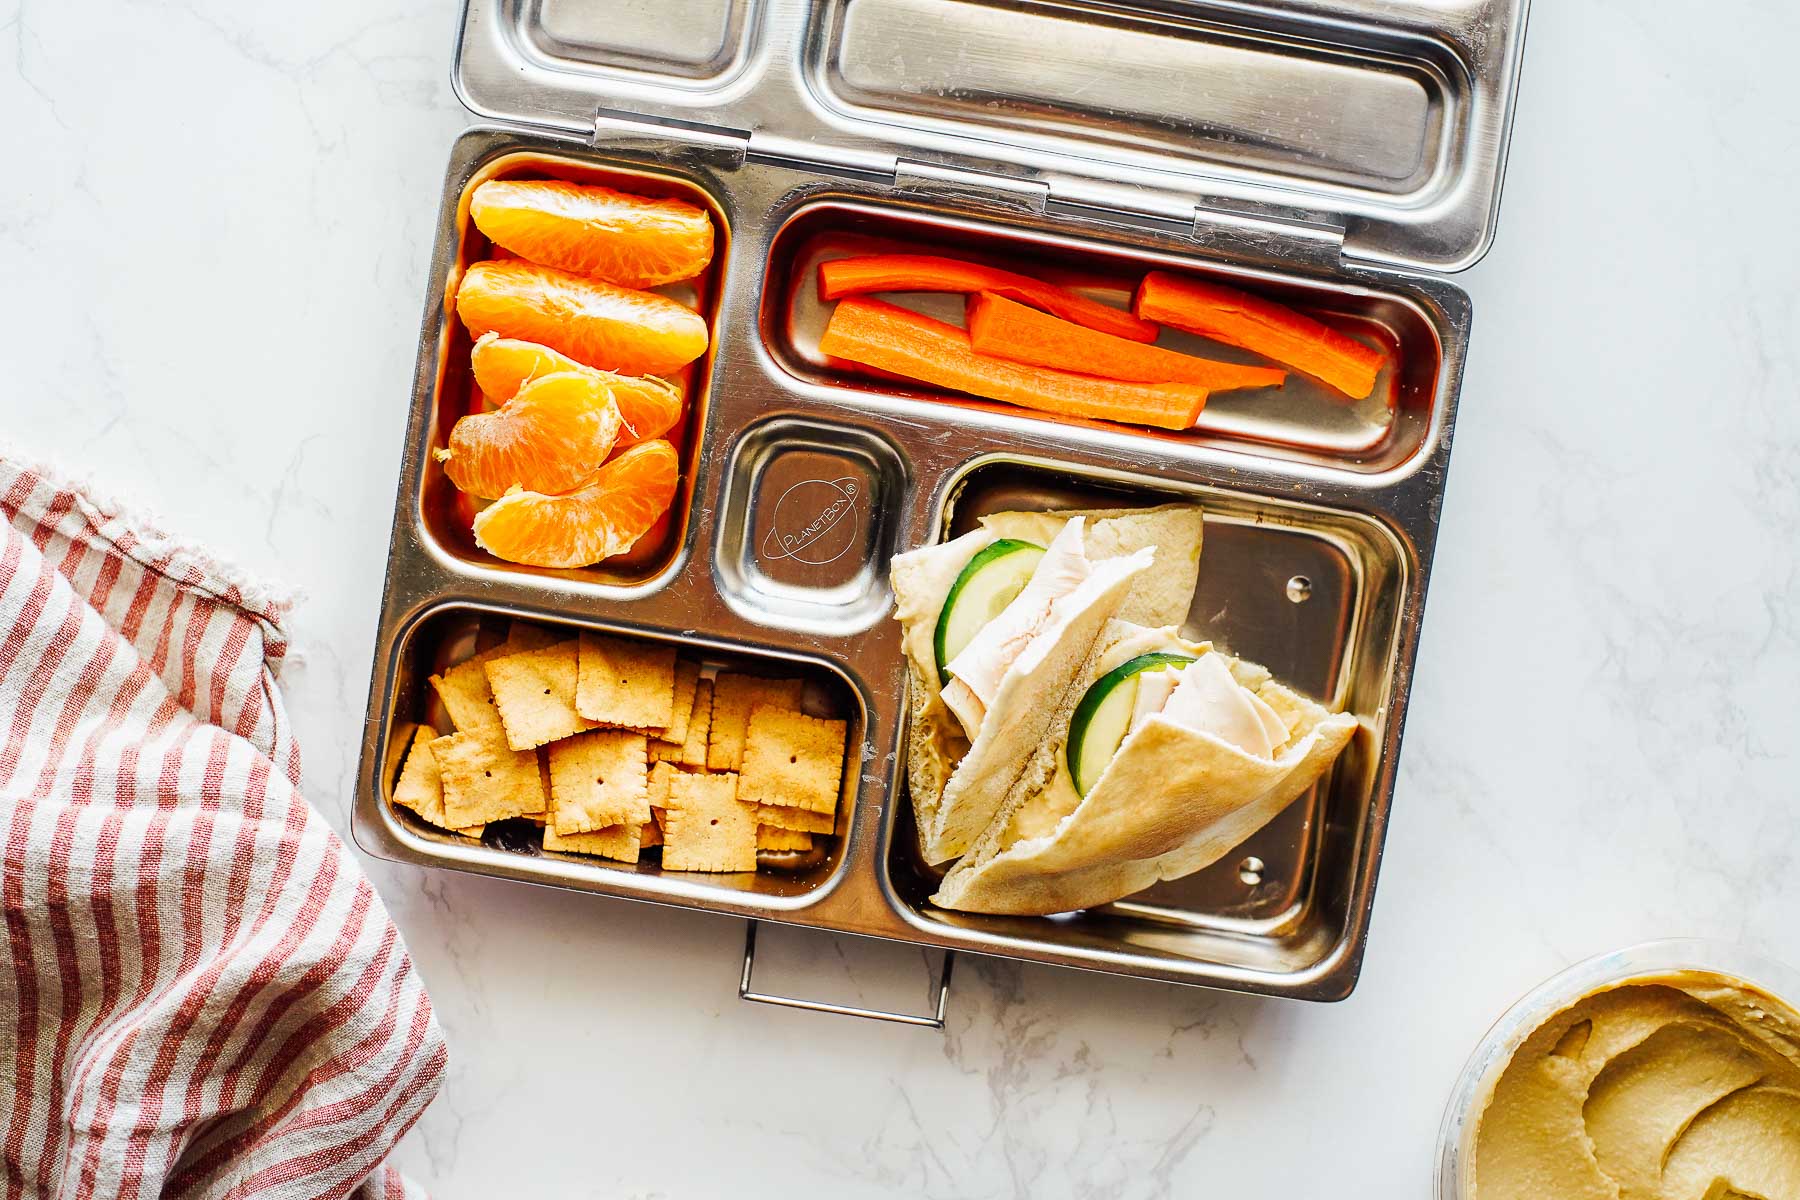 Turkey slices with hummus and cucumber slices in a pita bread, crackers, orange slices, and carrots in a lunchbox.